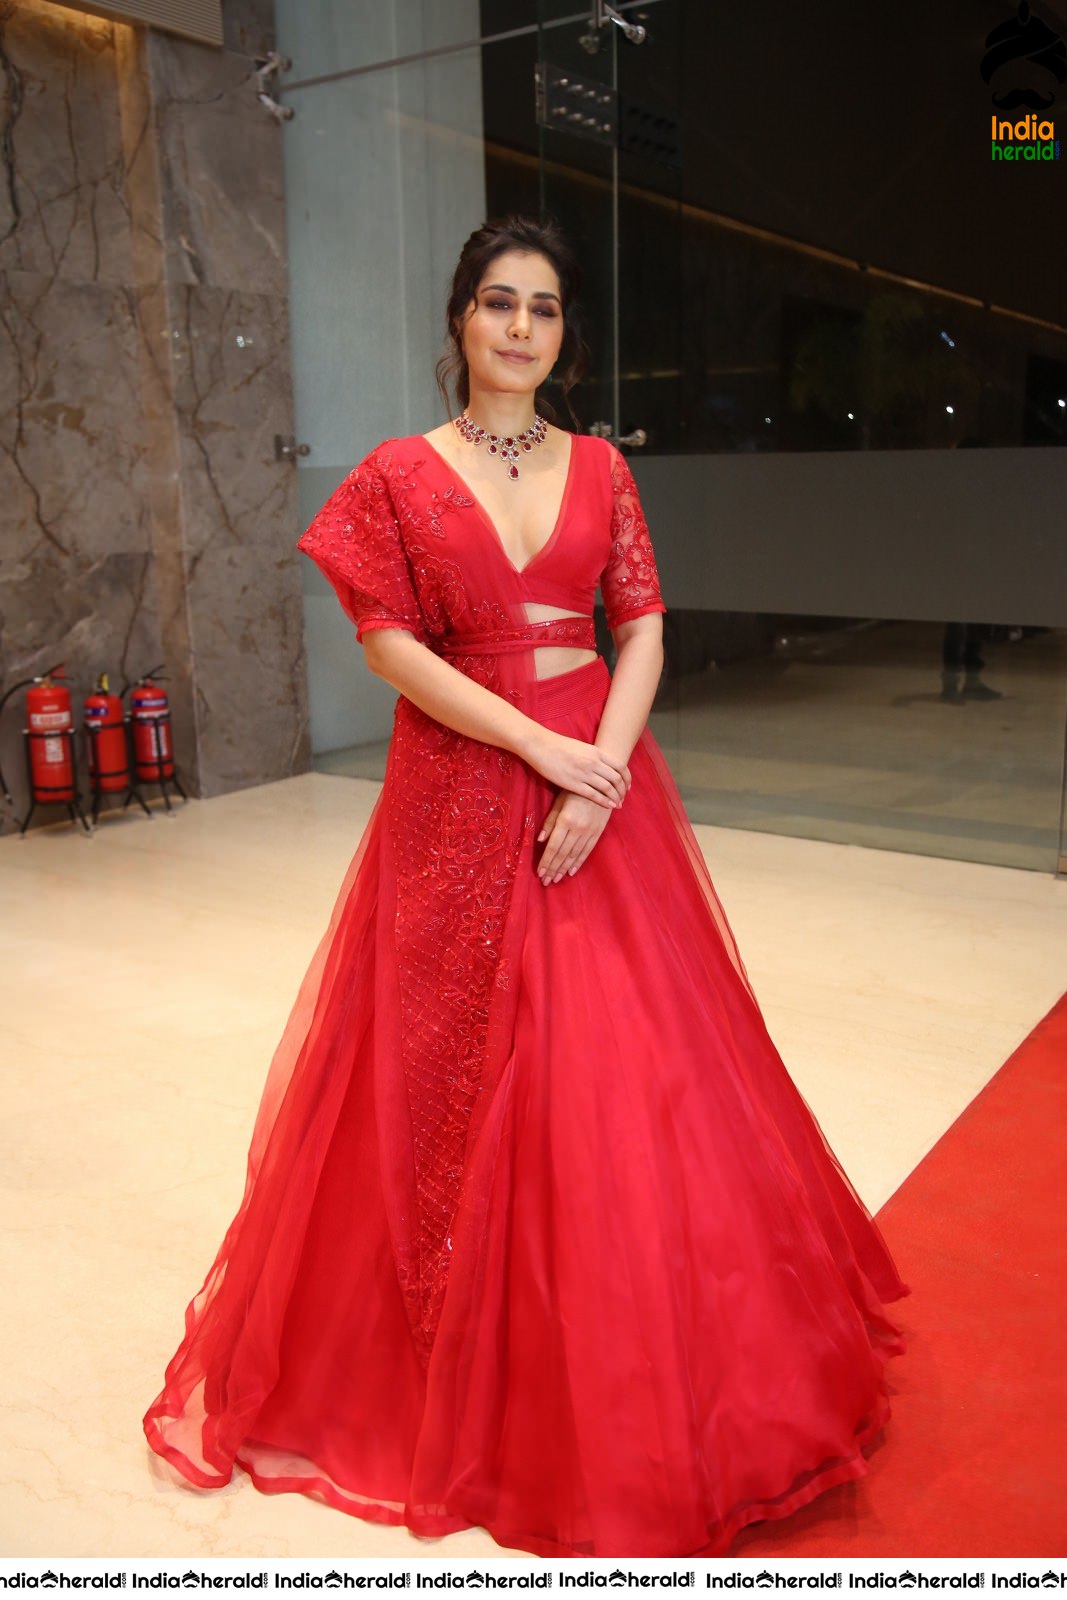 Raashi Khanna Latest Red Hot Photos in Waist and Cleavage revealing Costume